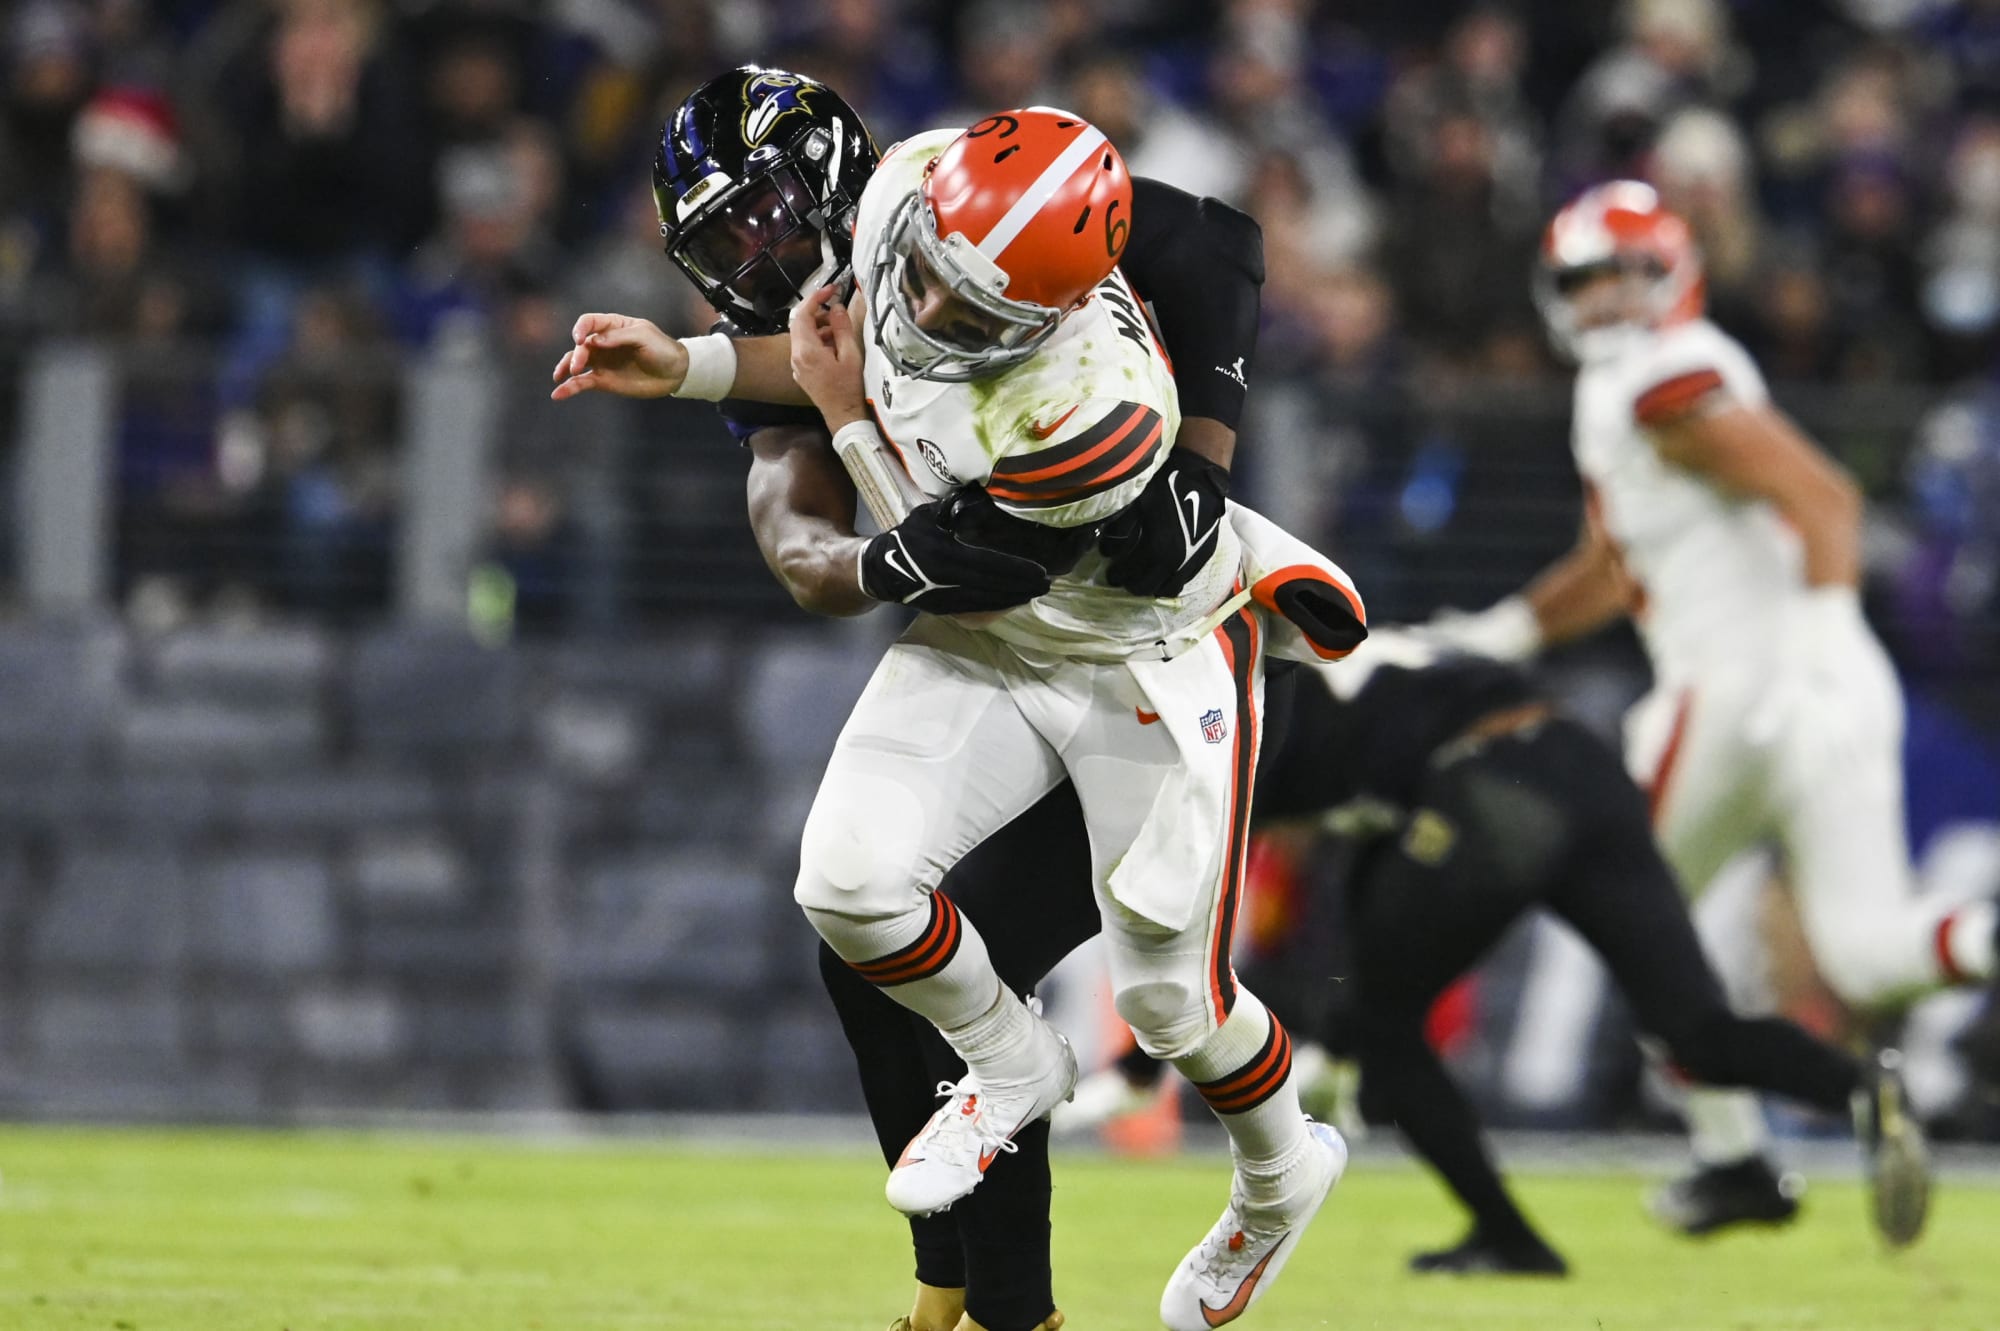 Cleveland Browns snap count analysis shows how Ravens shut down offense